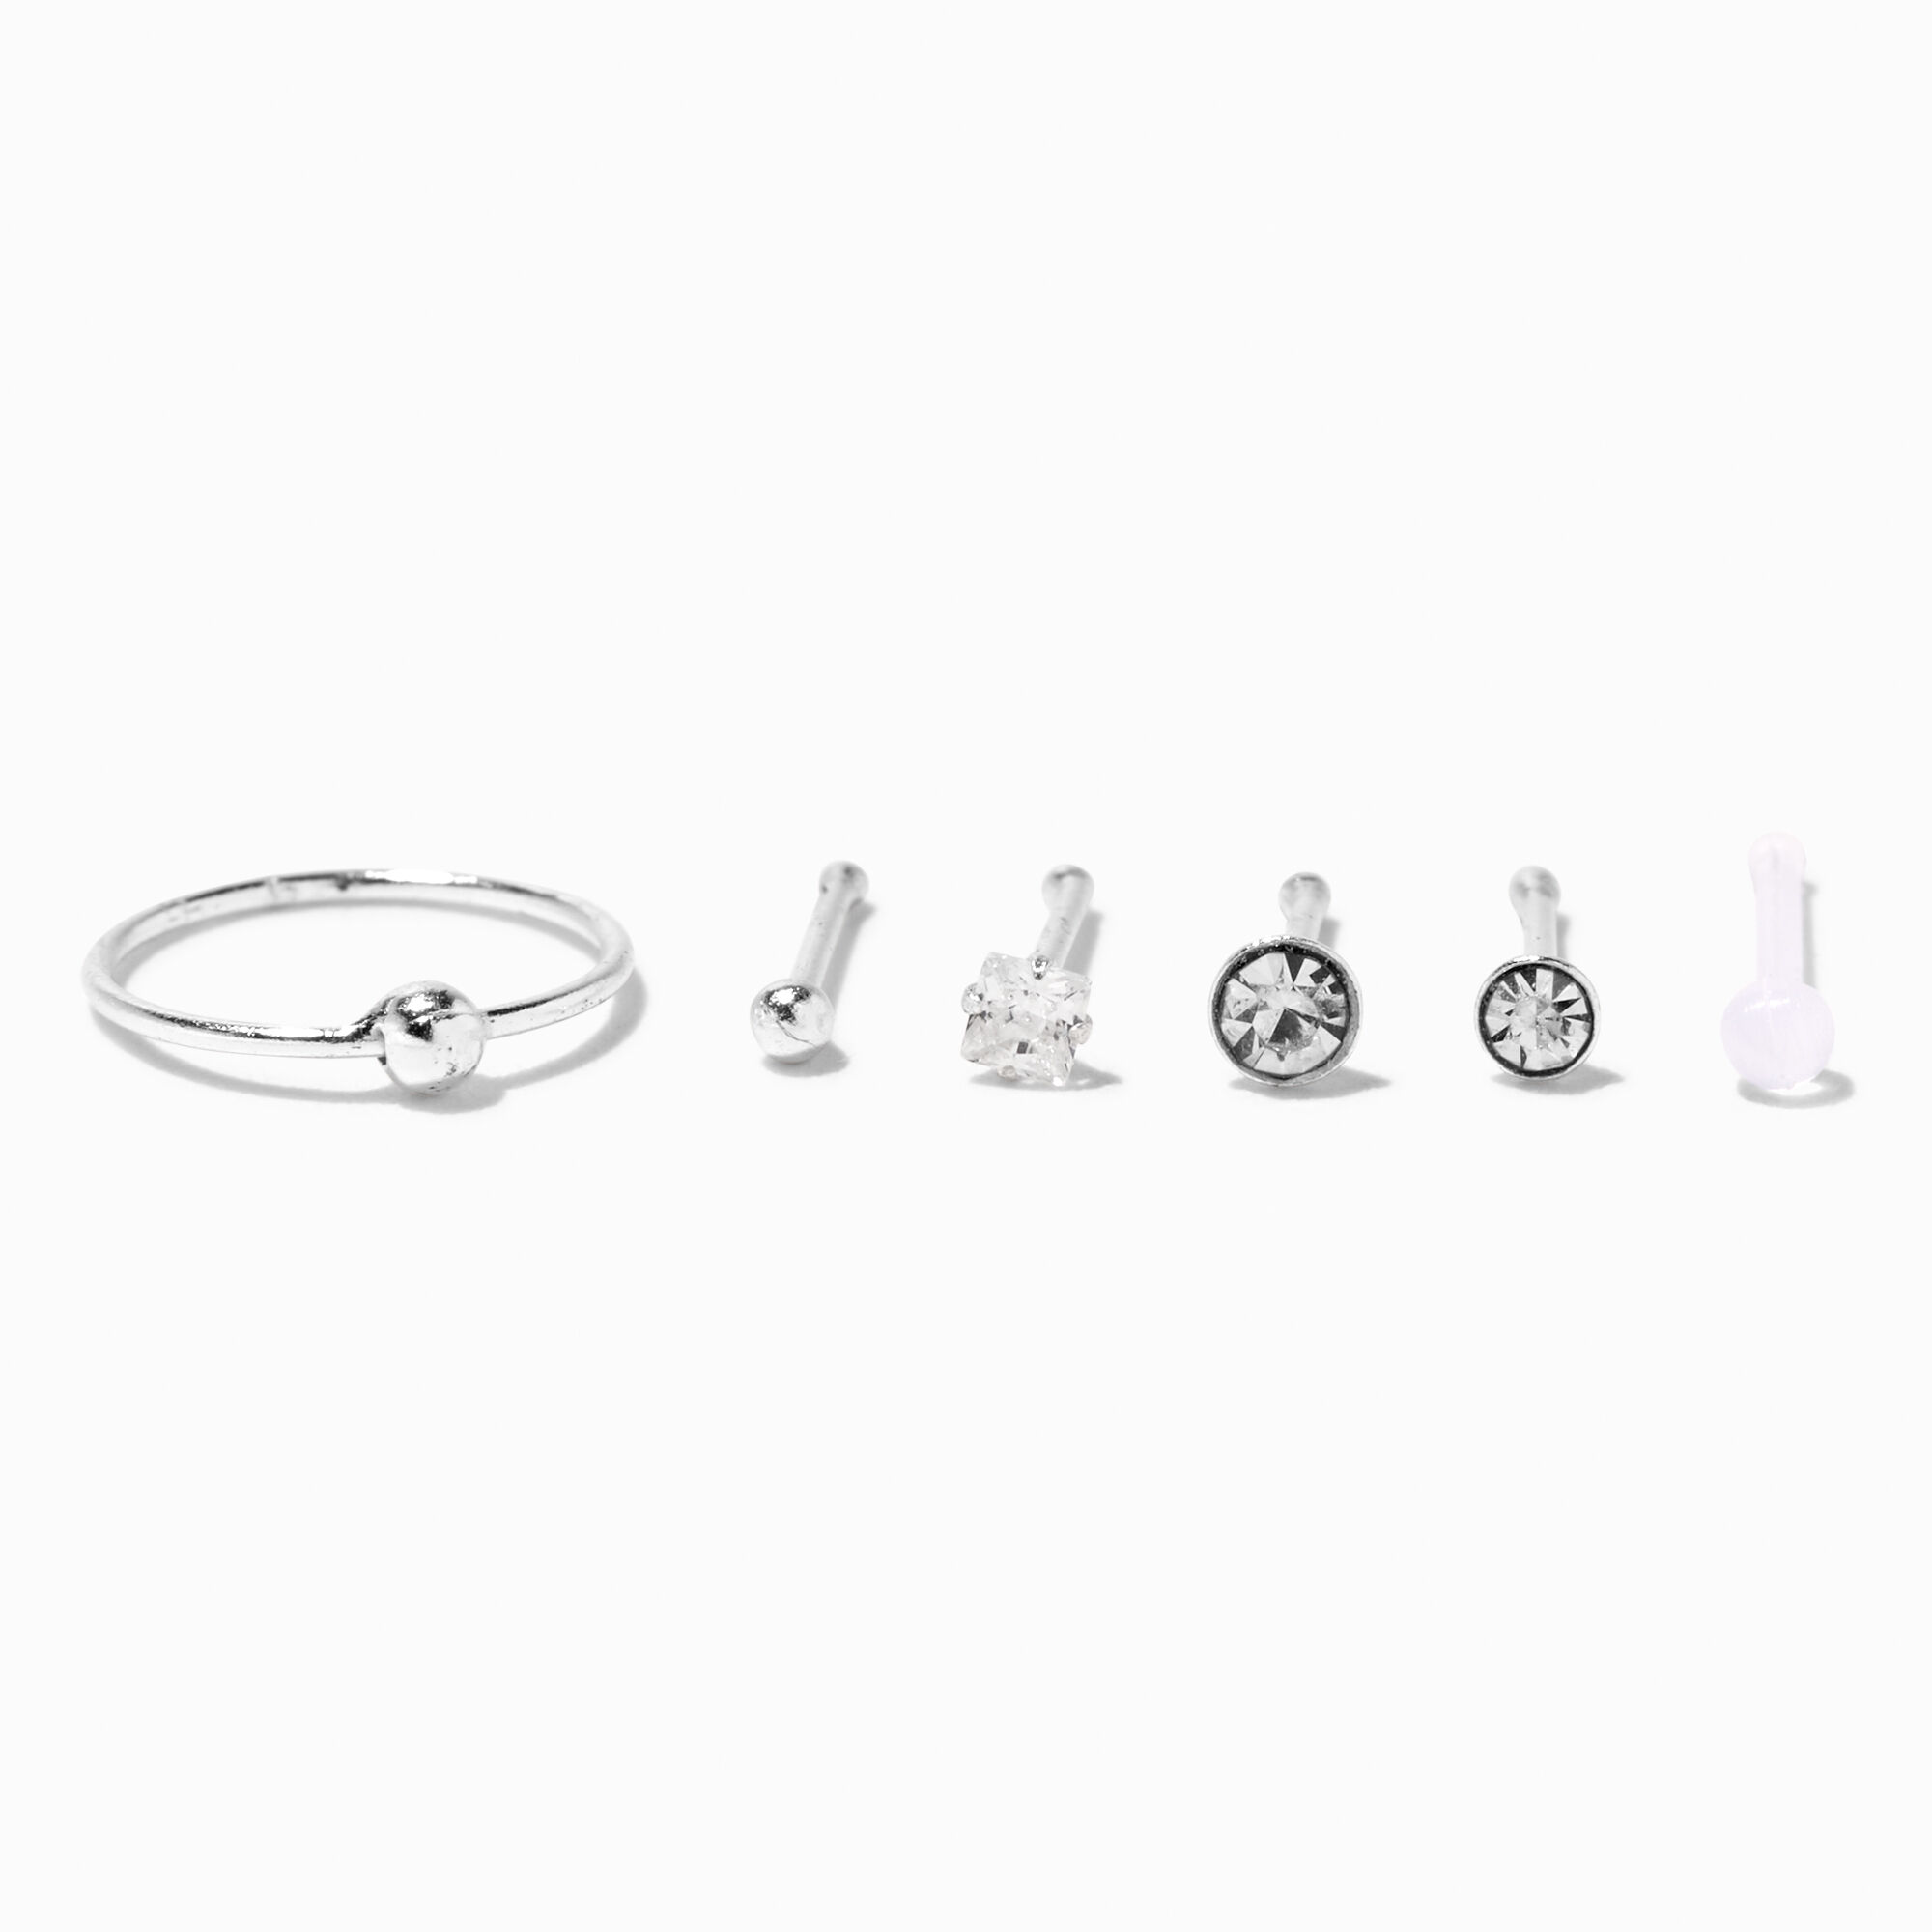 View Claires 22G Mixed Nose Stud Ring Set 6 Pack Silver information